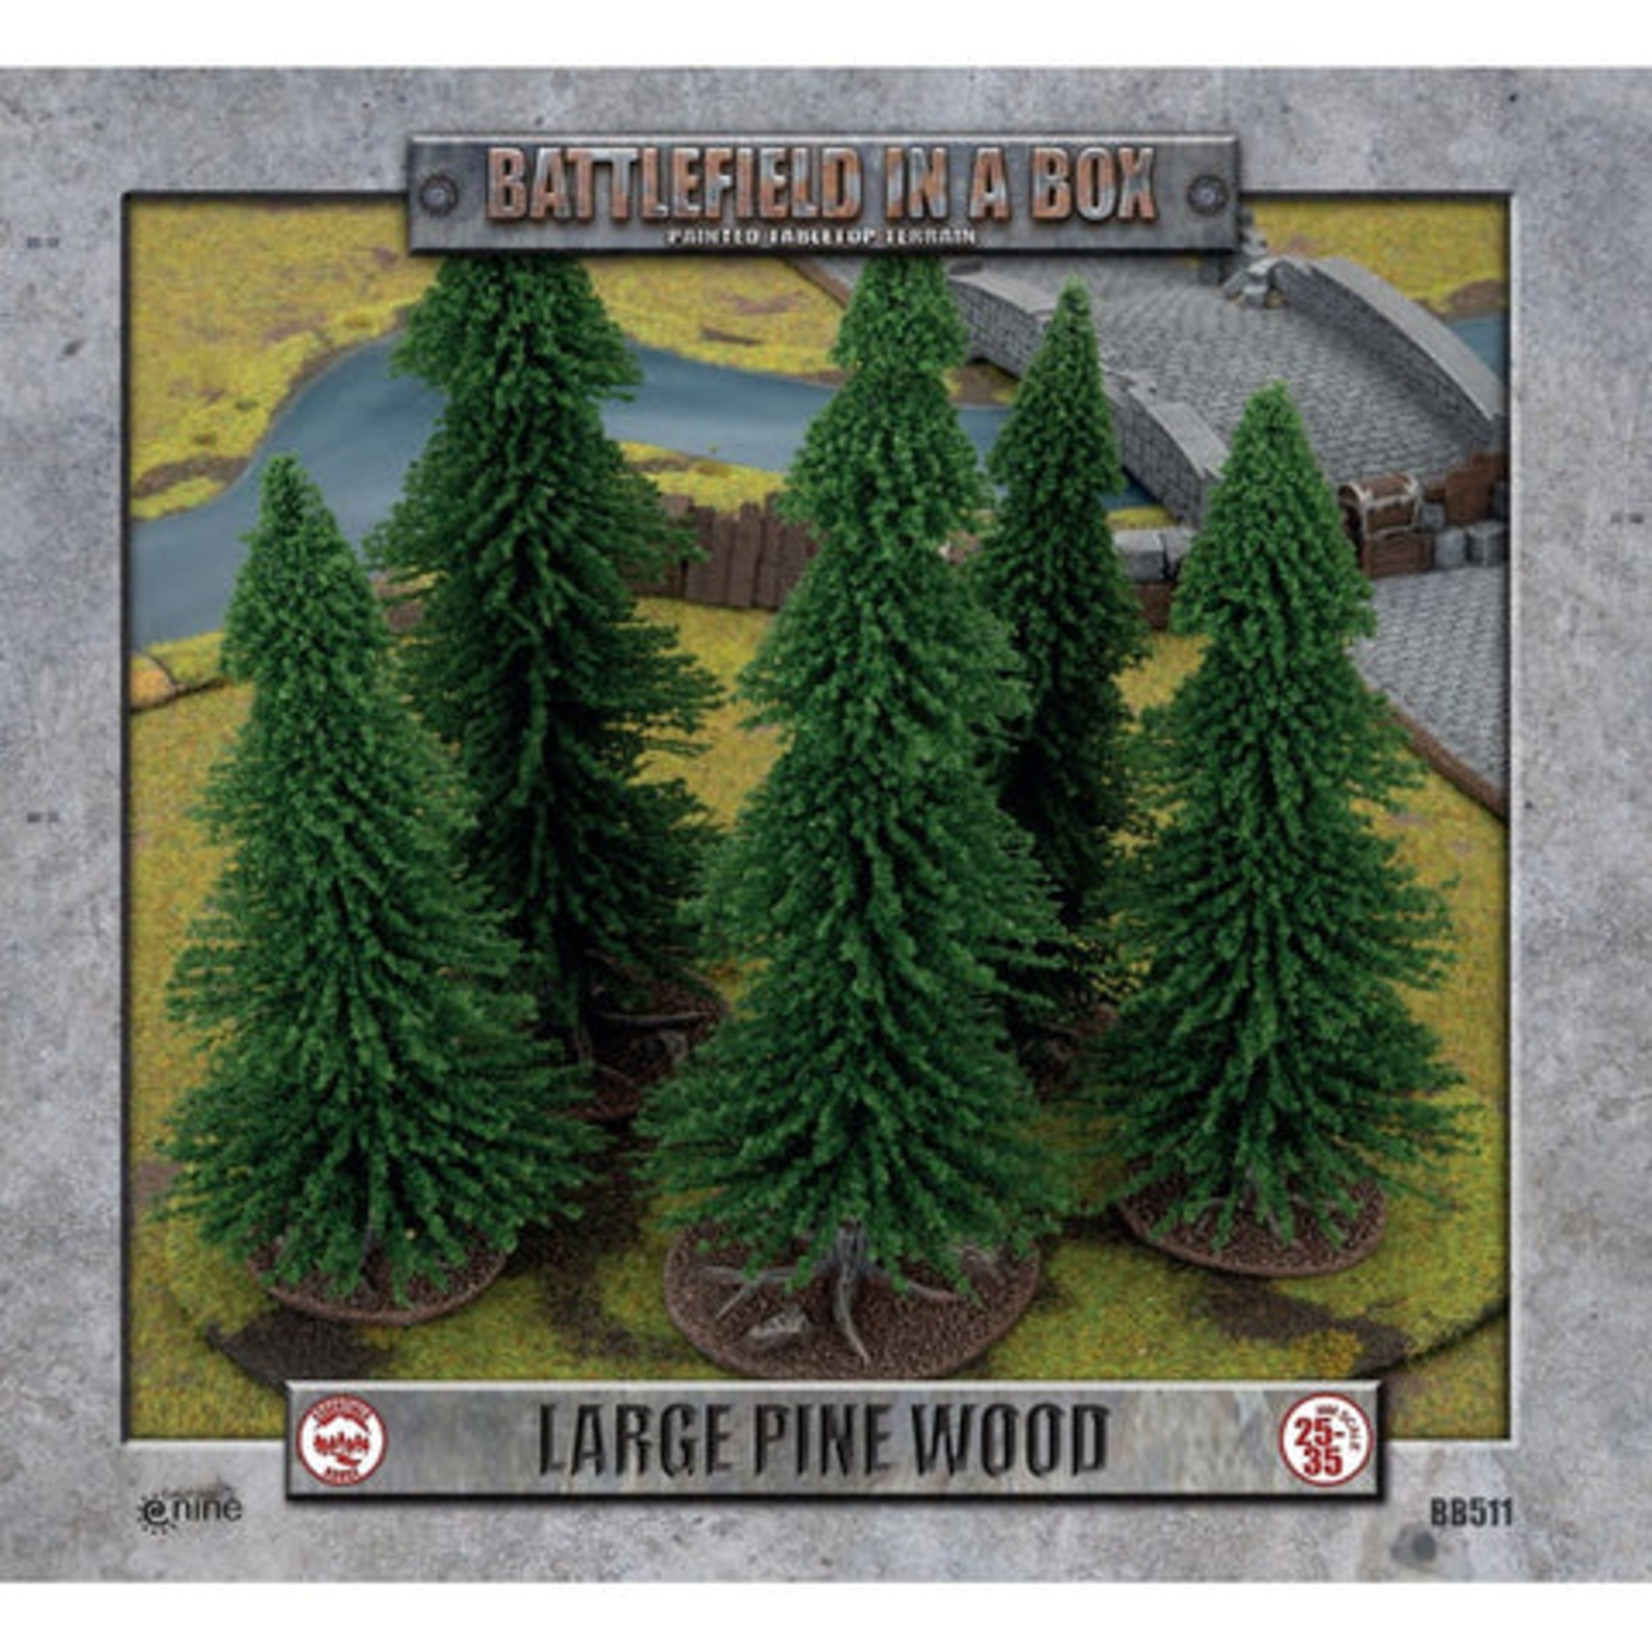 Battlefield in a Box Large Pine Wood